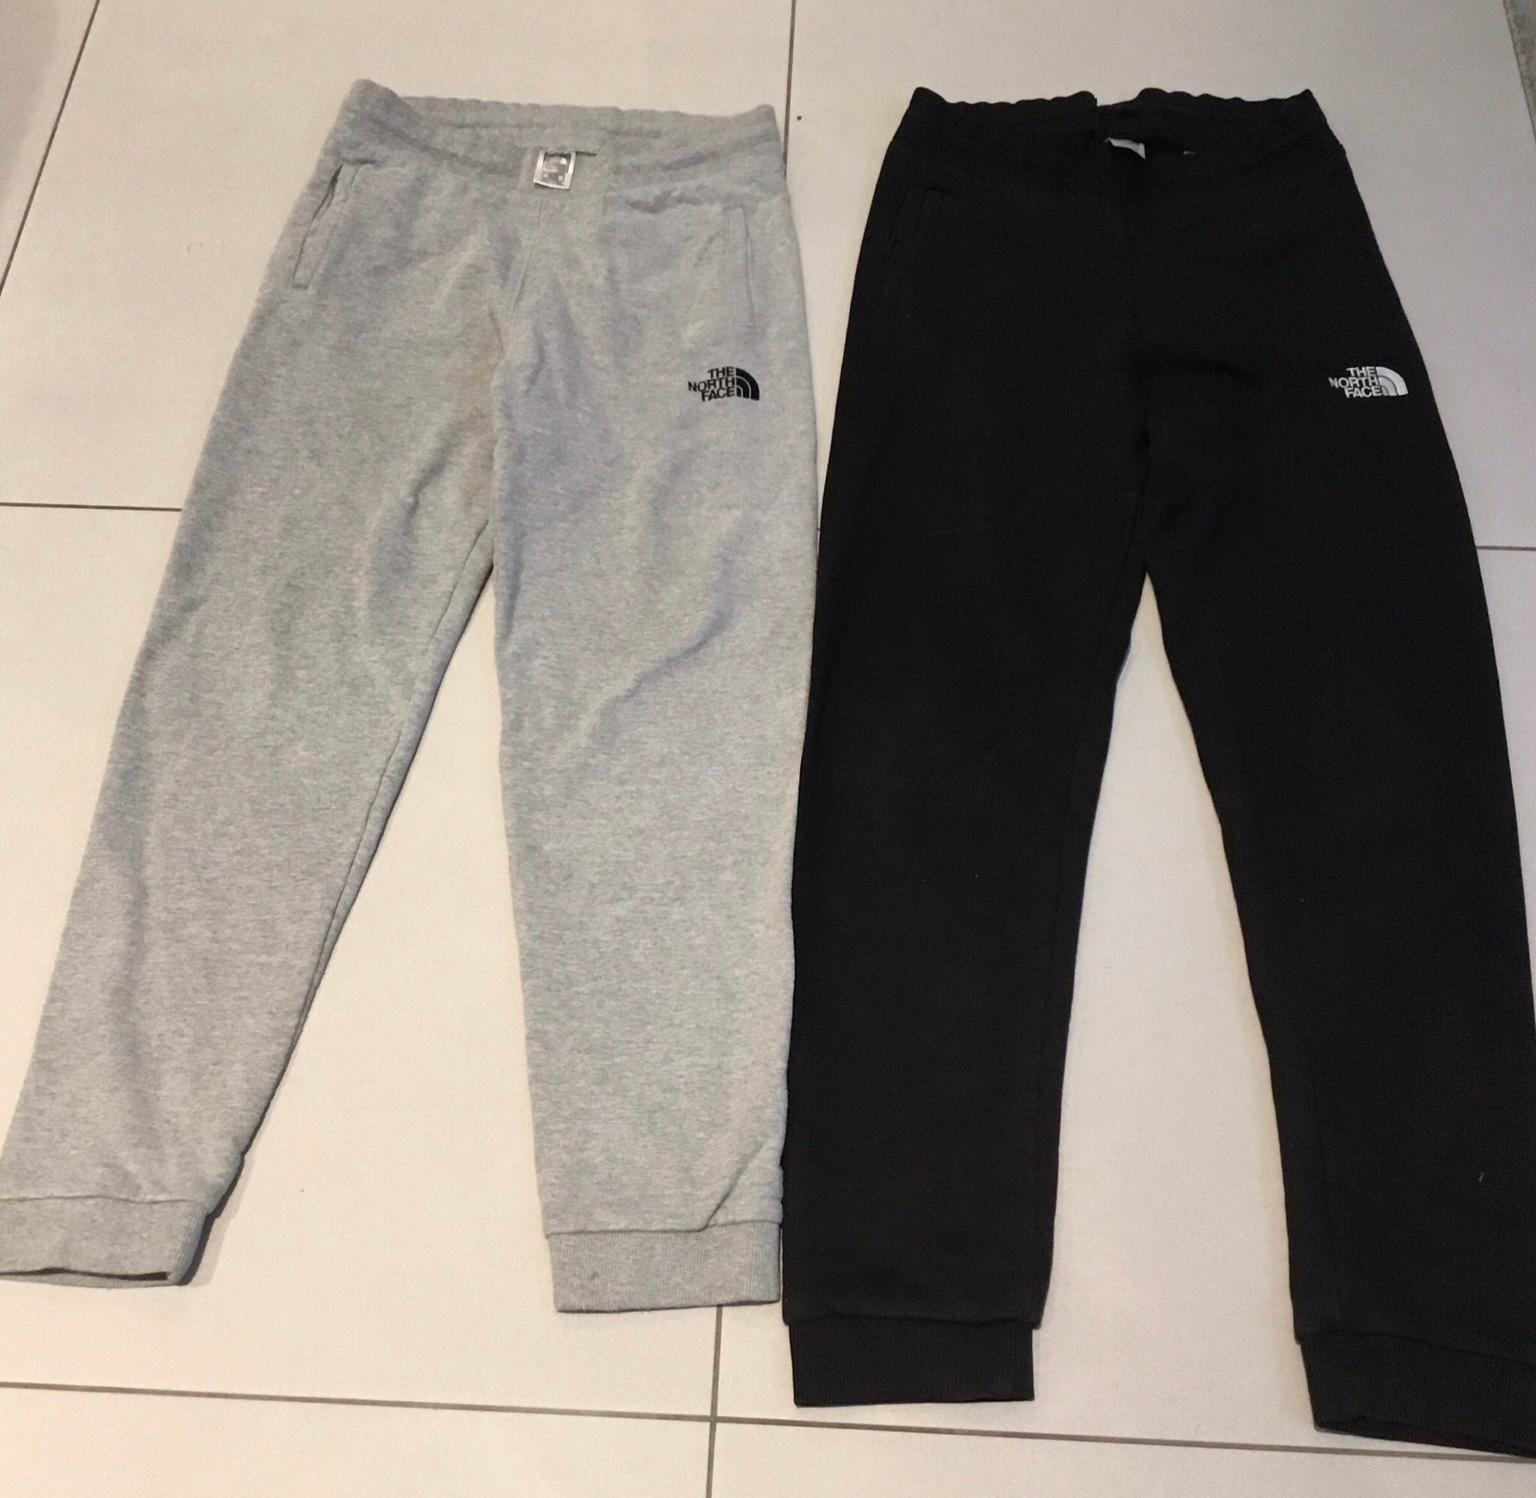 2 x Tracksuit Bottoms in E17 London 